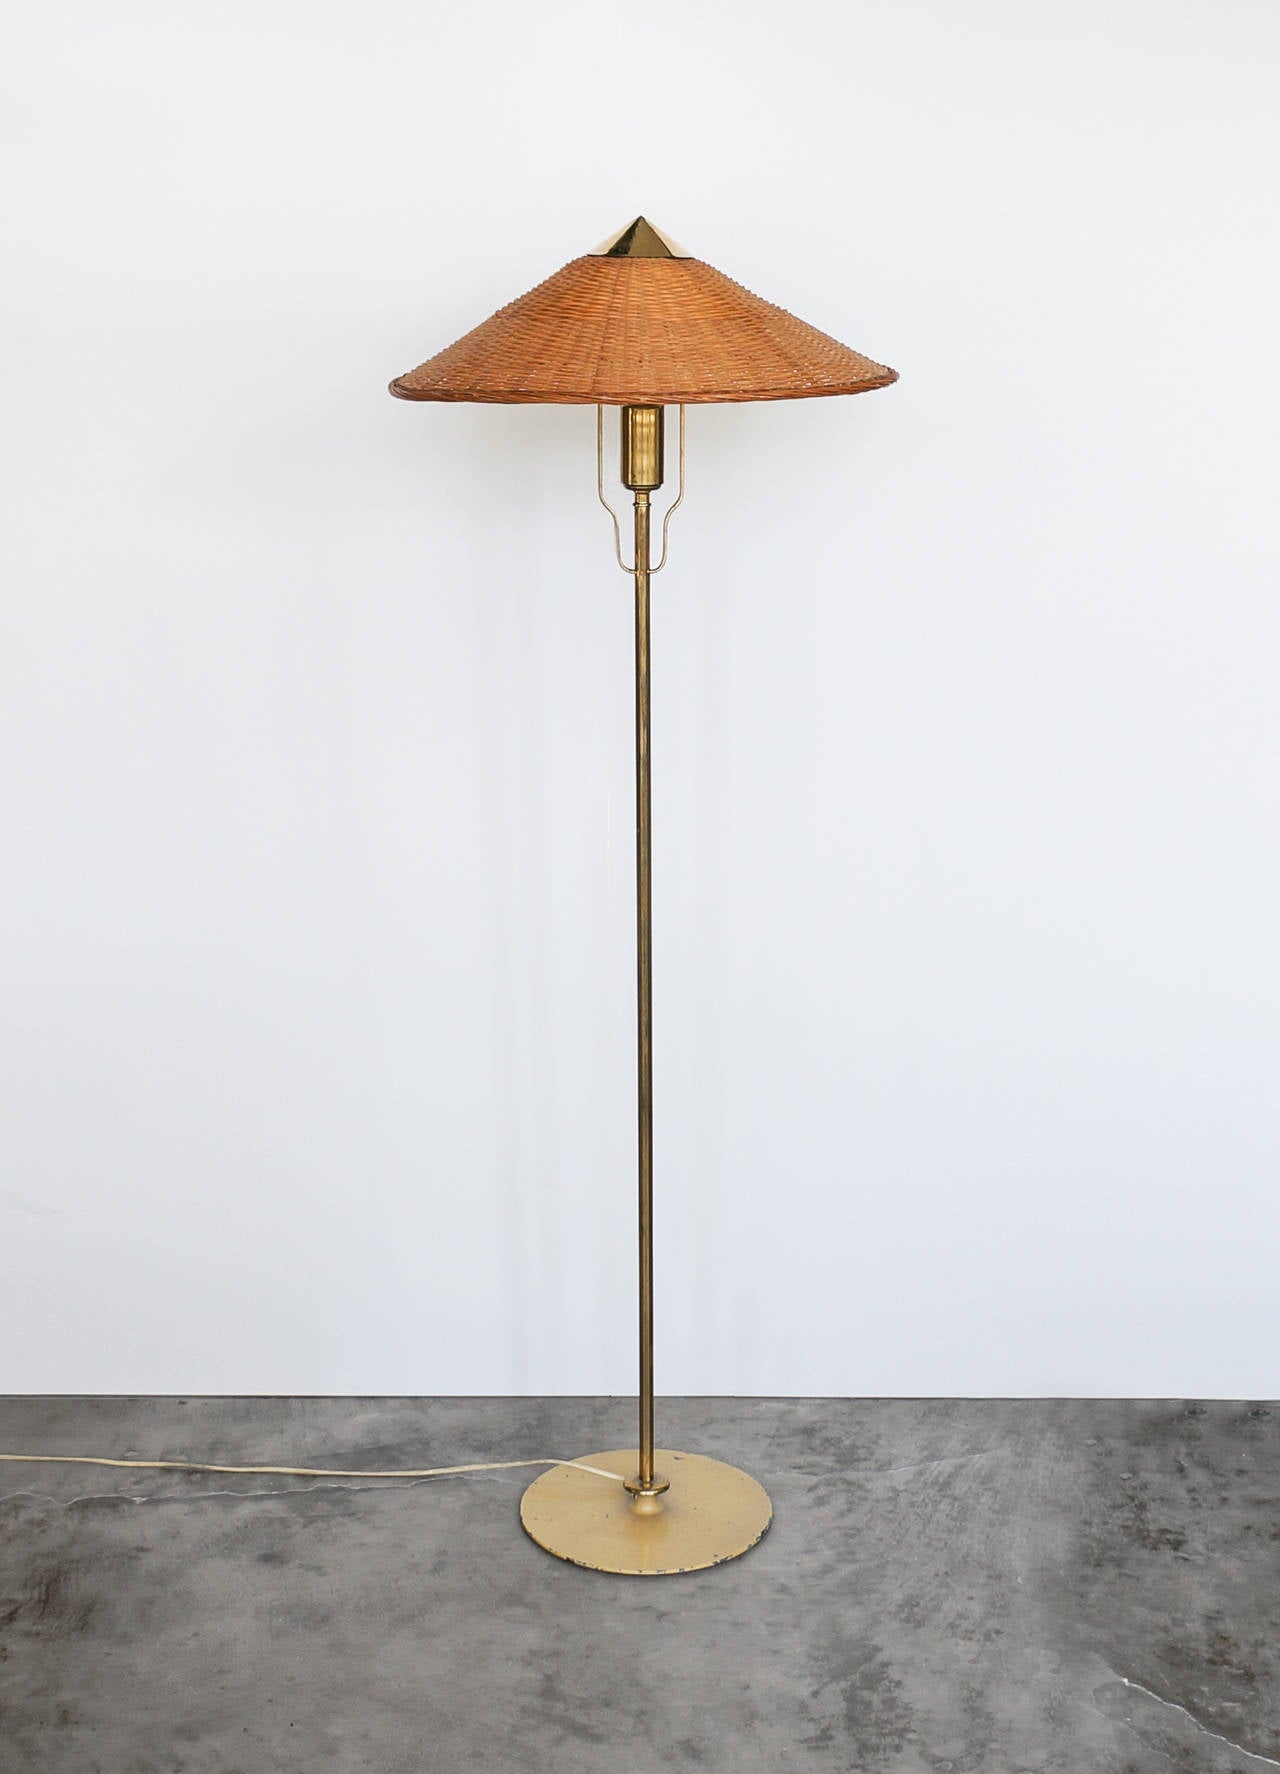 Paavo Tynell.

Floor lamp, model 5762.

Taito Oy.
Finland, late 1940s.
Brass, painted metal, iron, original wicker shade.

Measures: H 57 x W 17.7 x D 17.7 in.
H 145 x W 45 x D 45 cm.

Good original condition. Some wear due to it´s age on